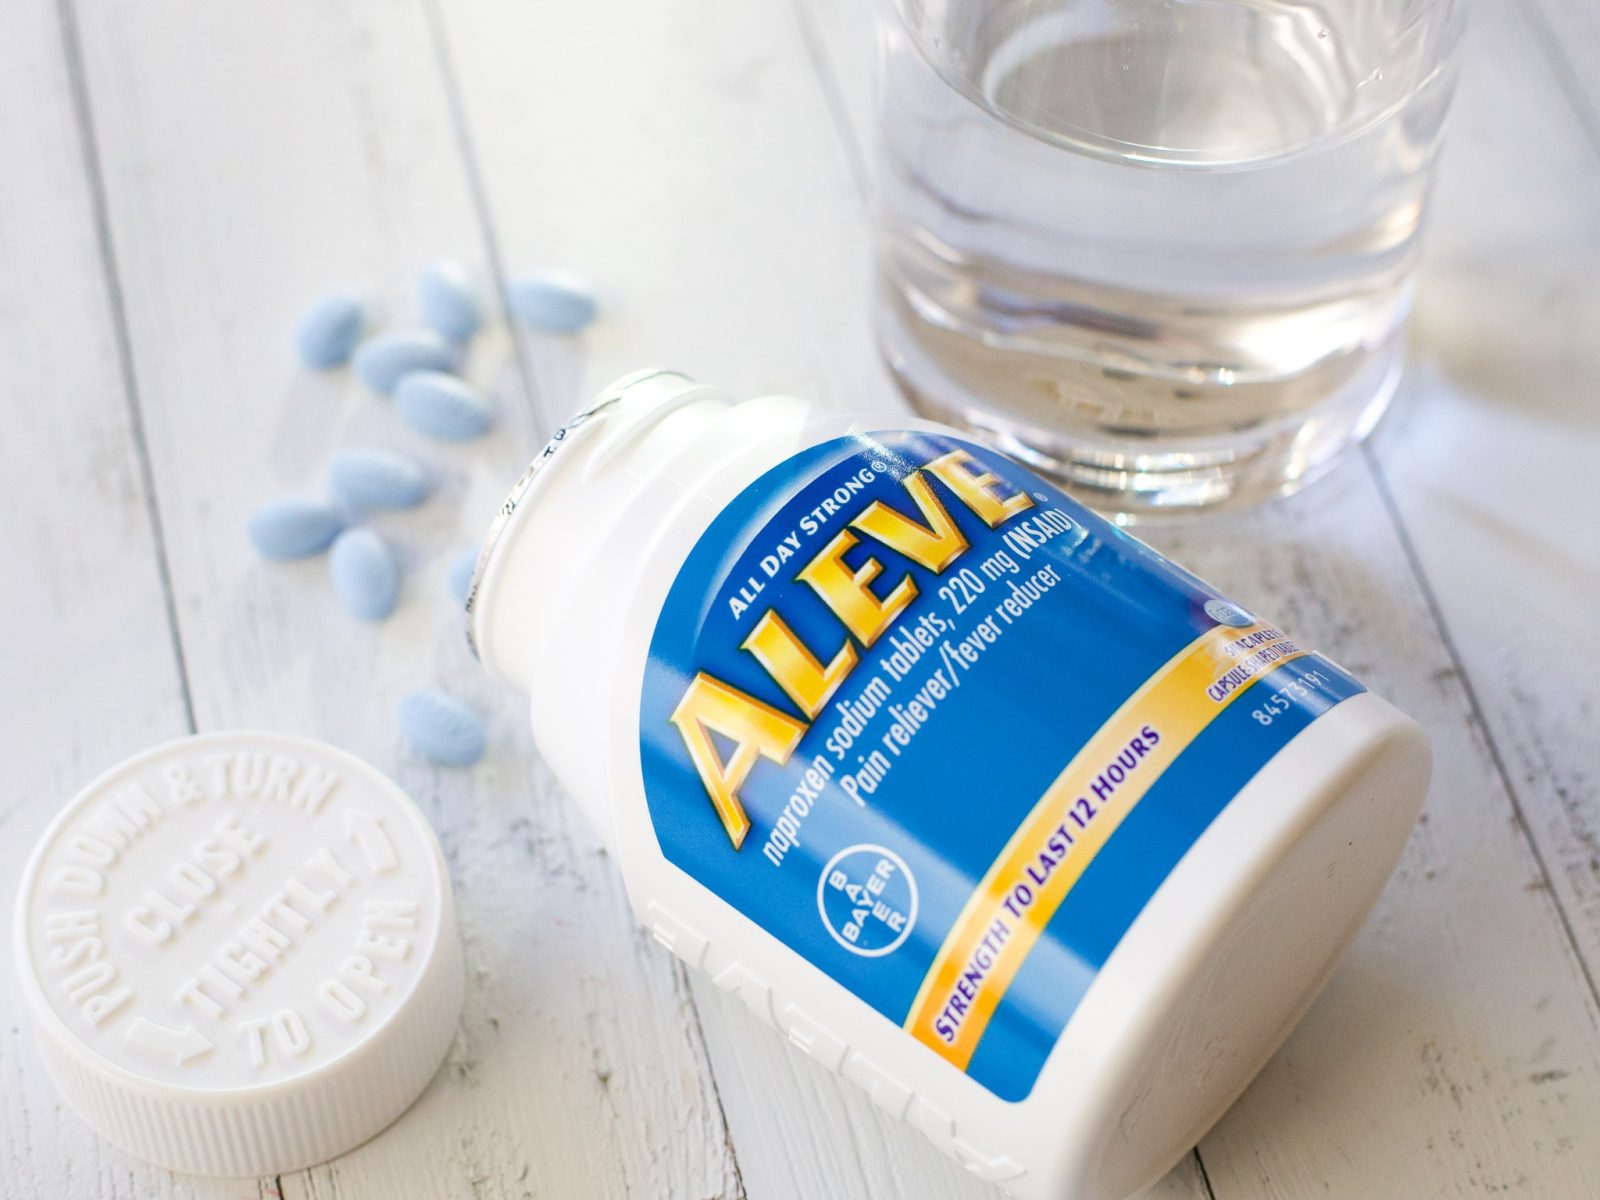 Aleve 200-Count As Low As $7.49 At Kroger – Save $12.50 Per Bottle